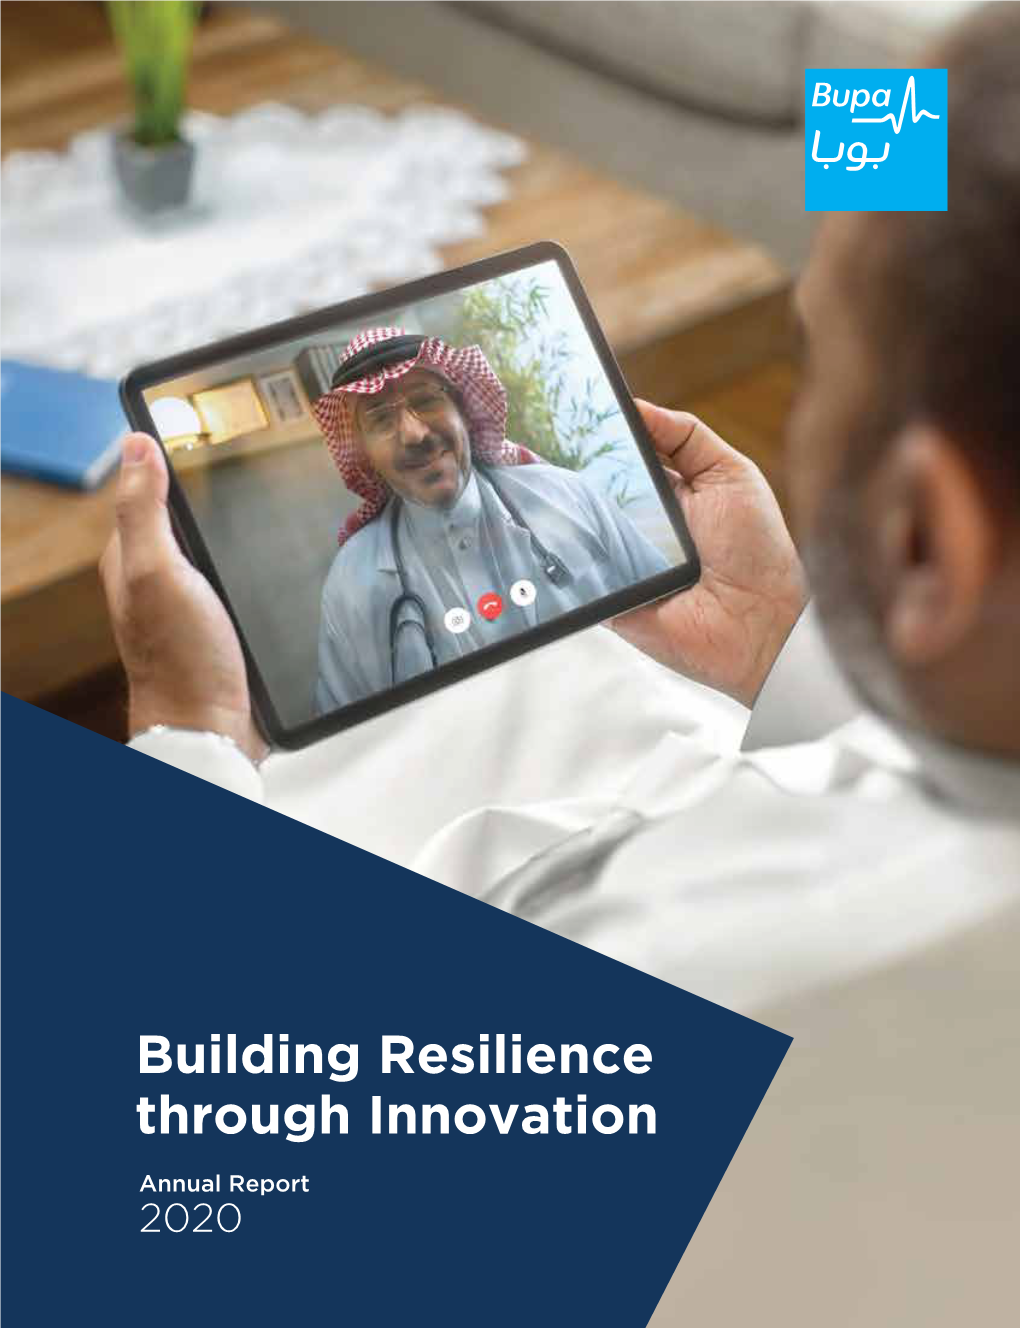 Building Resilience Through Innovation 2020 Annual Report Bupa.Com.Sa Building Resilience Through Innovation @Bupaarabia Annual Report 2020